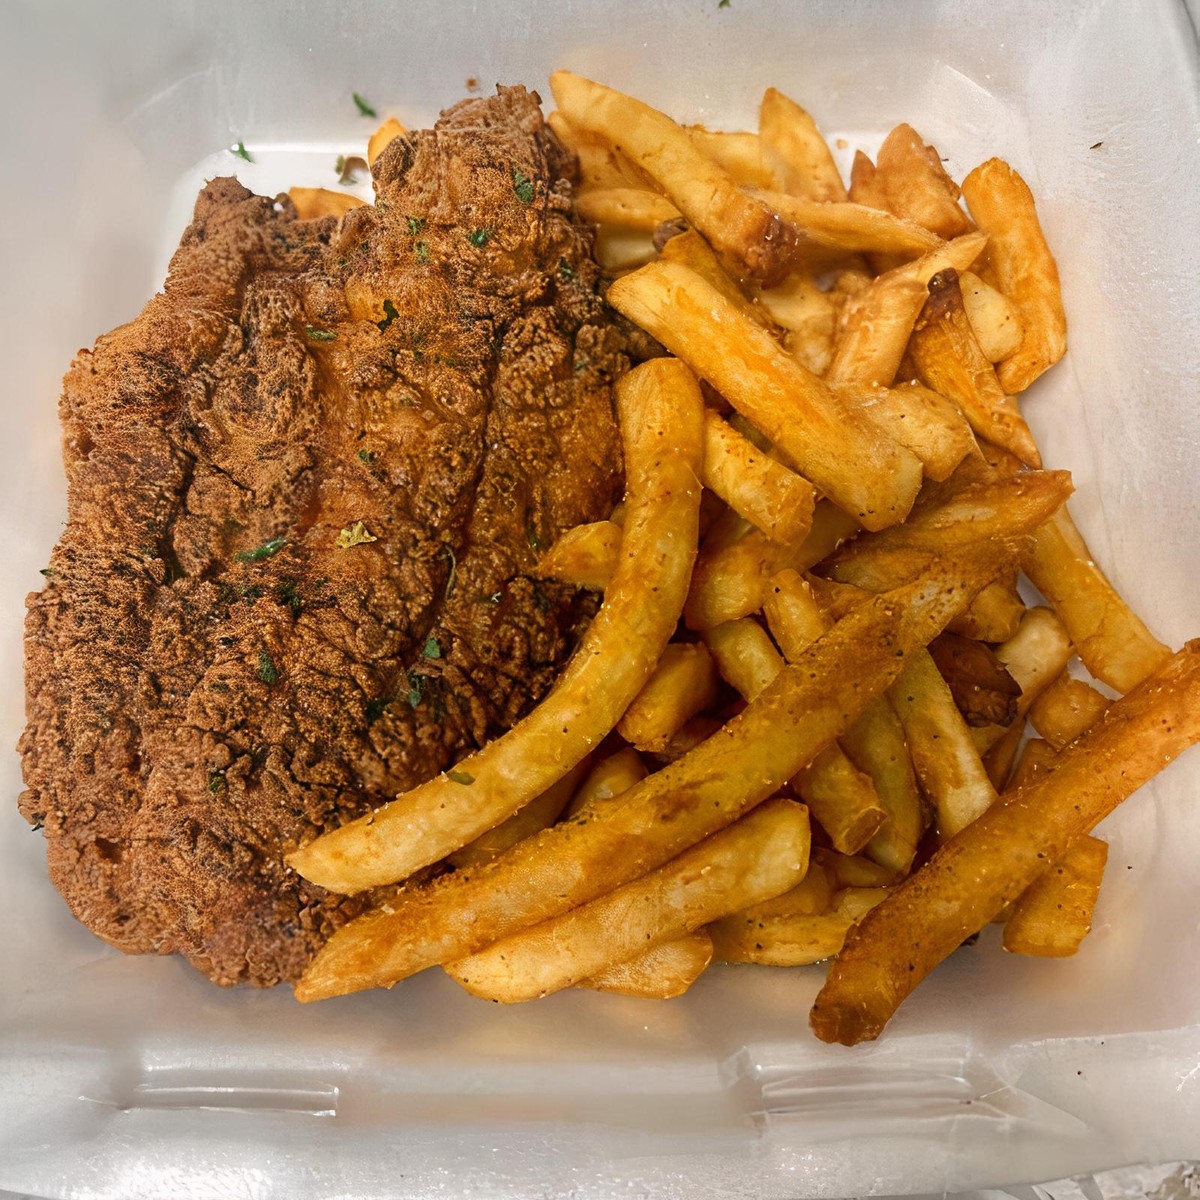 Xquisite Dining 2488 Winchester Road - Order Pickup and Delivery